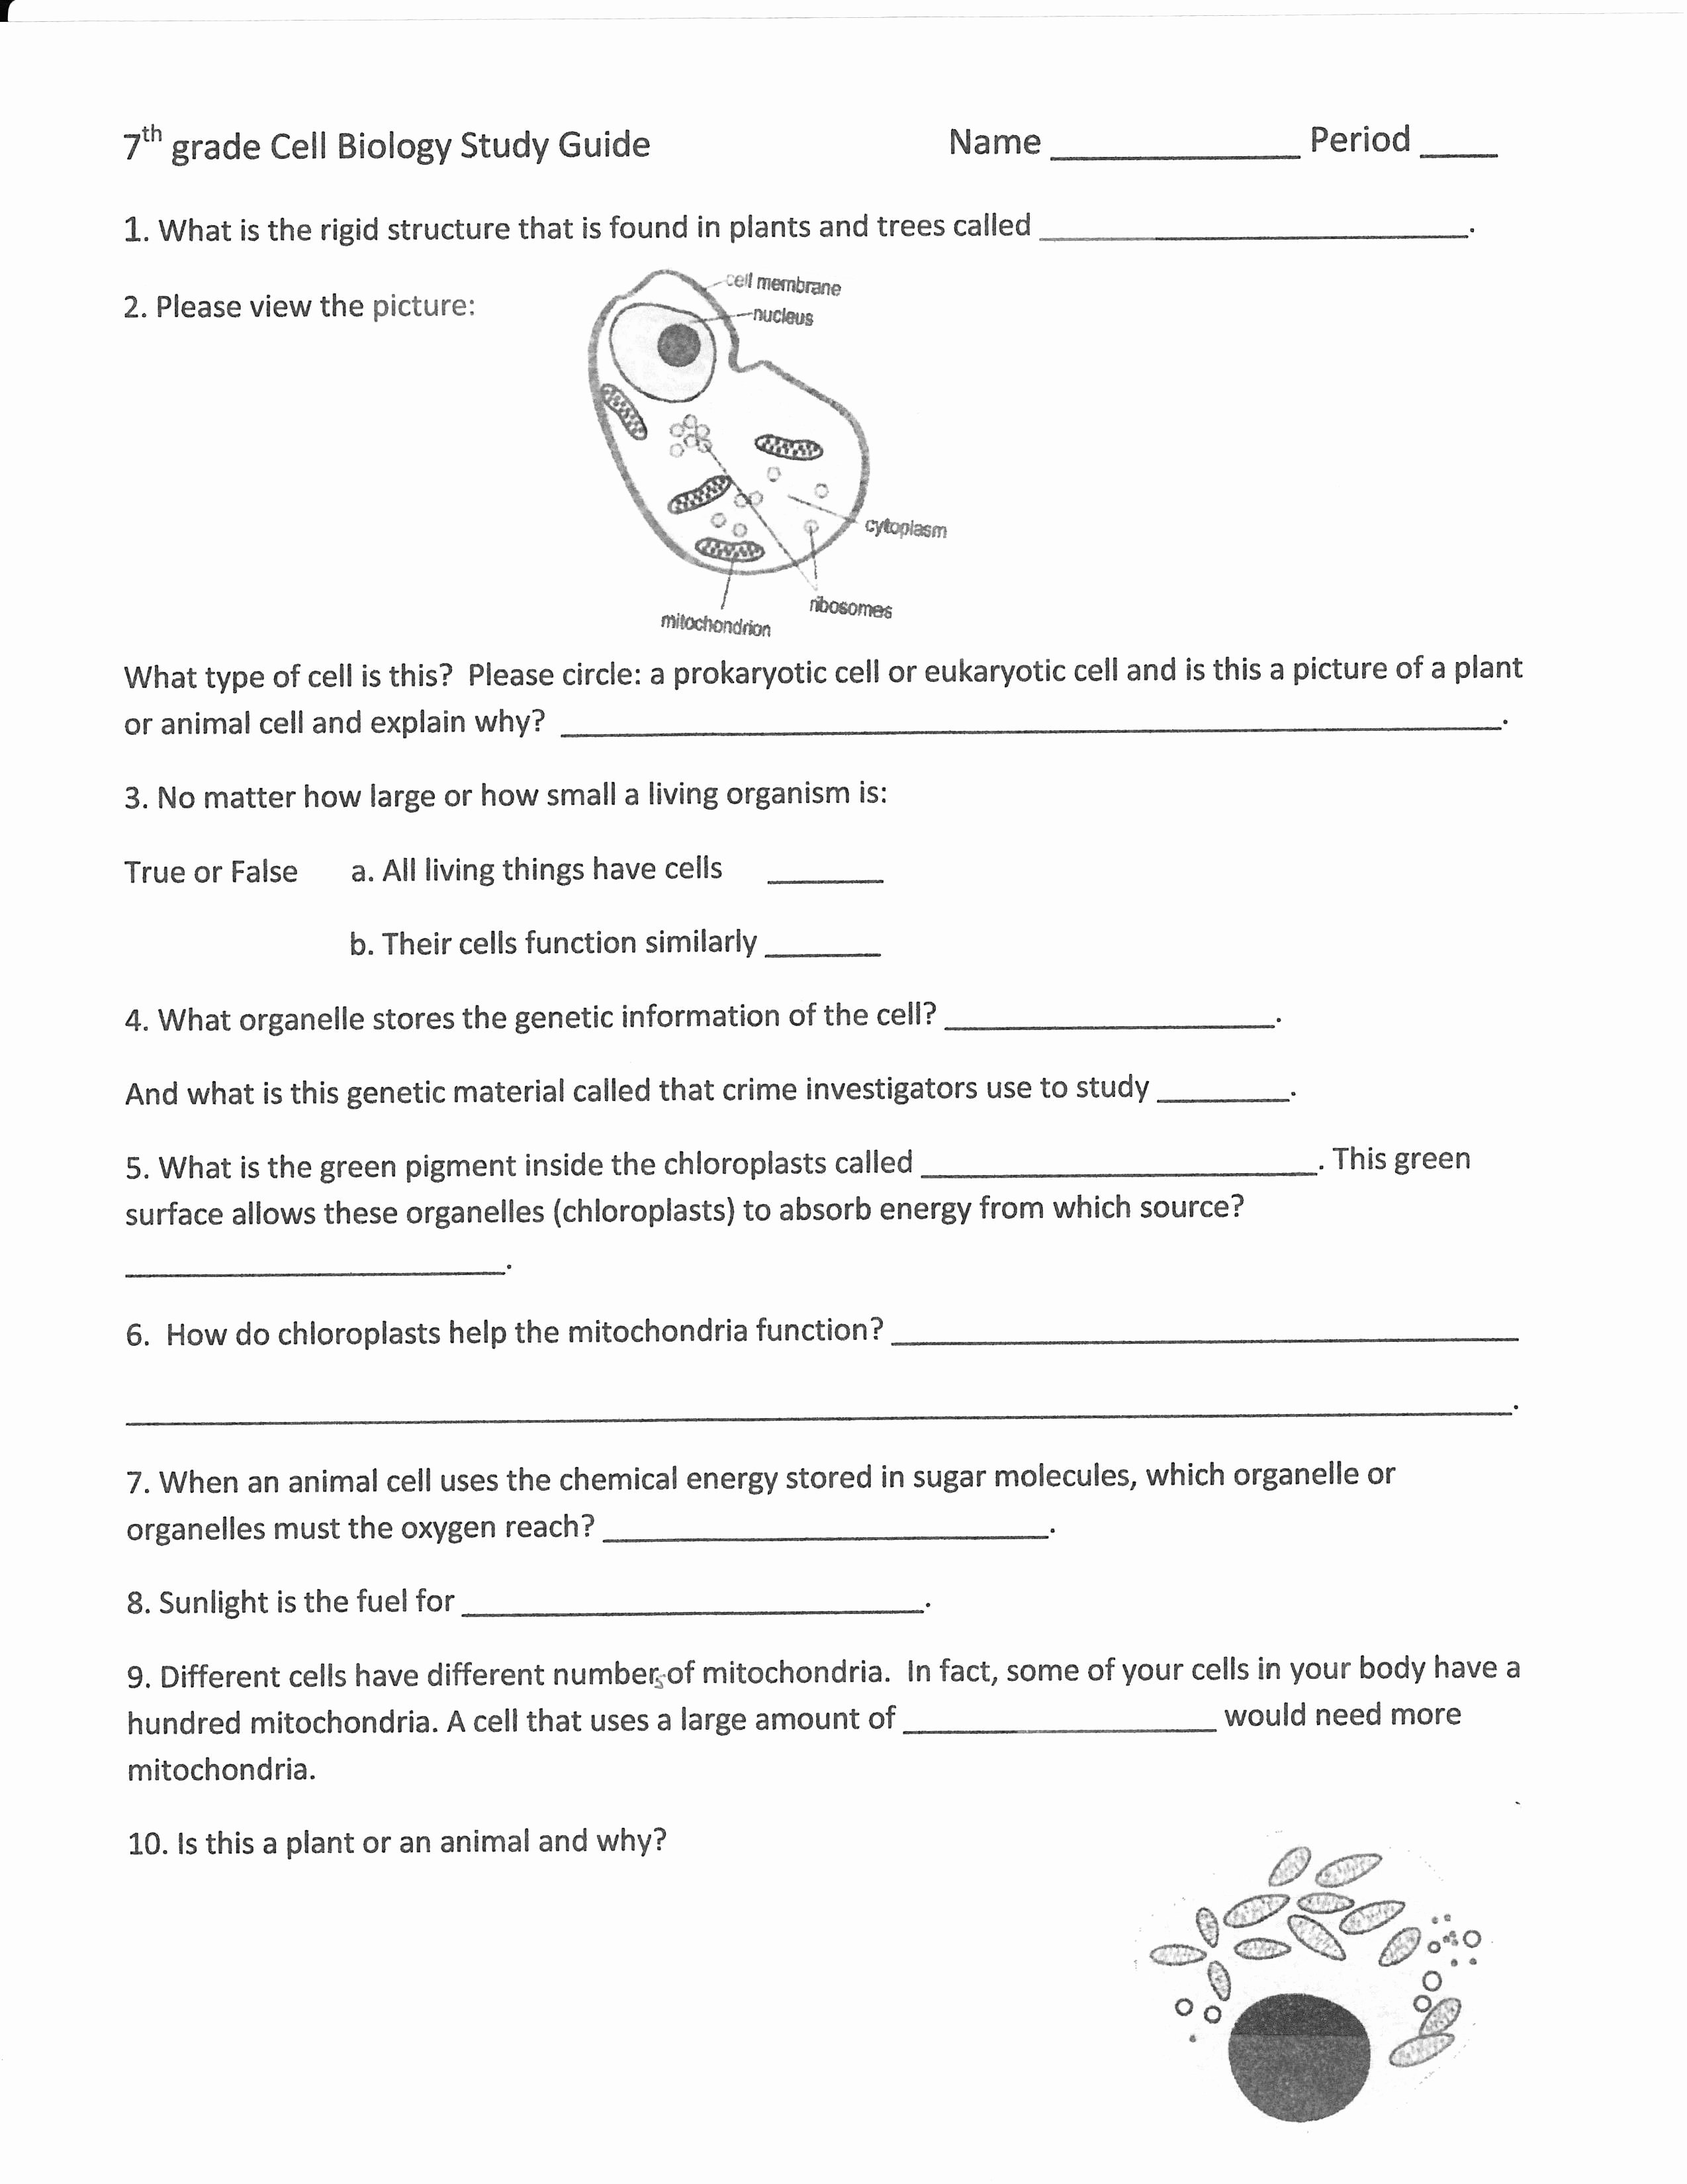 Animal Cells Worksheet Answers Unique Cell organelles Worksheet Answer Key Worksheet Idea Template